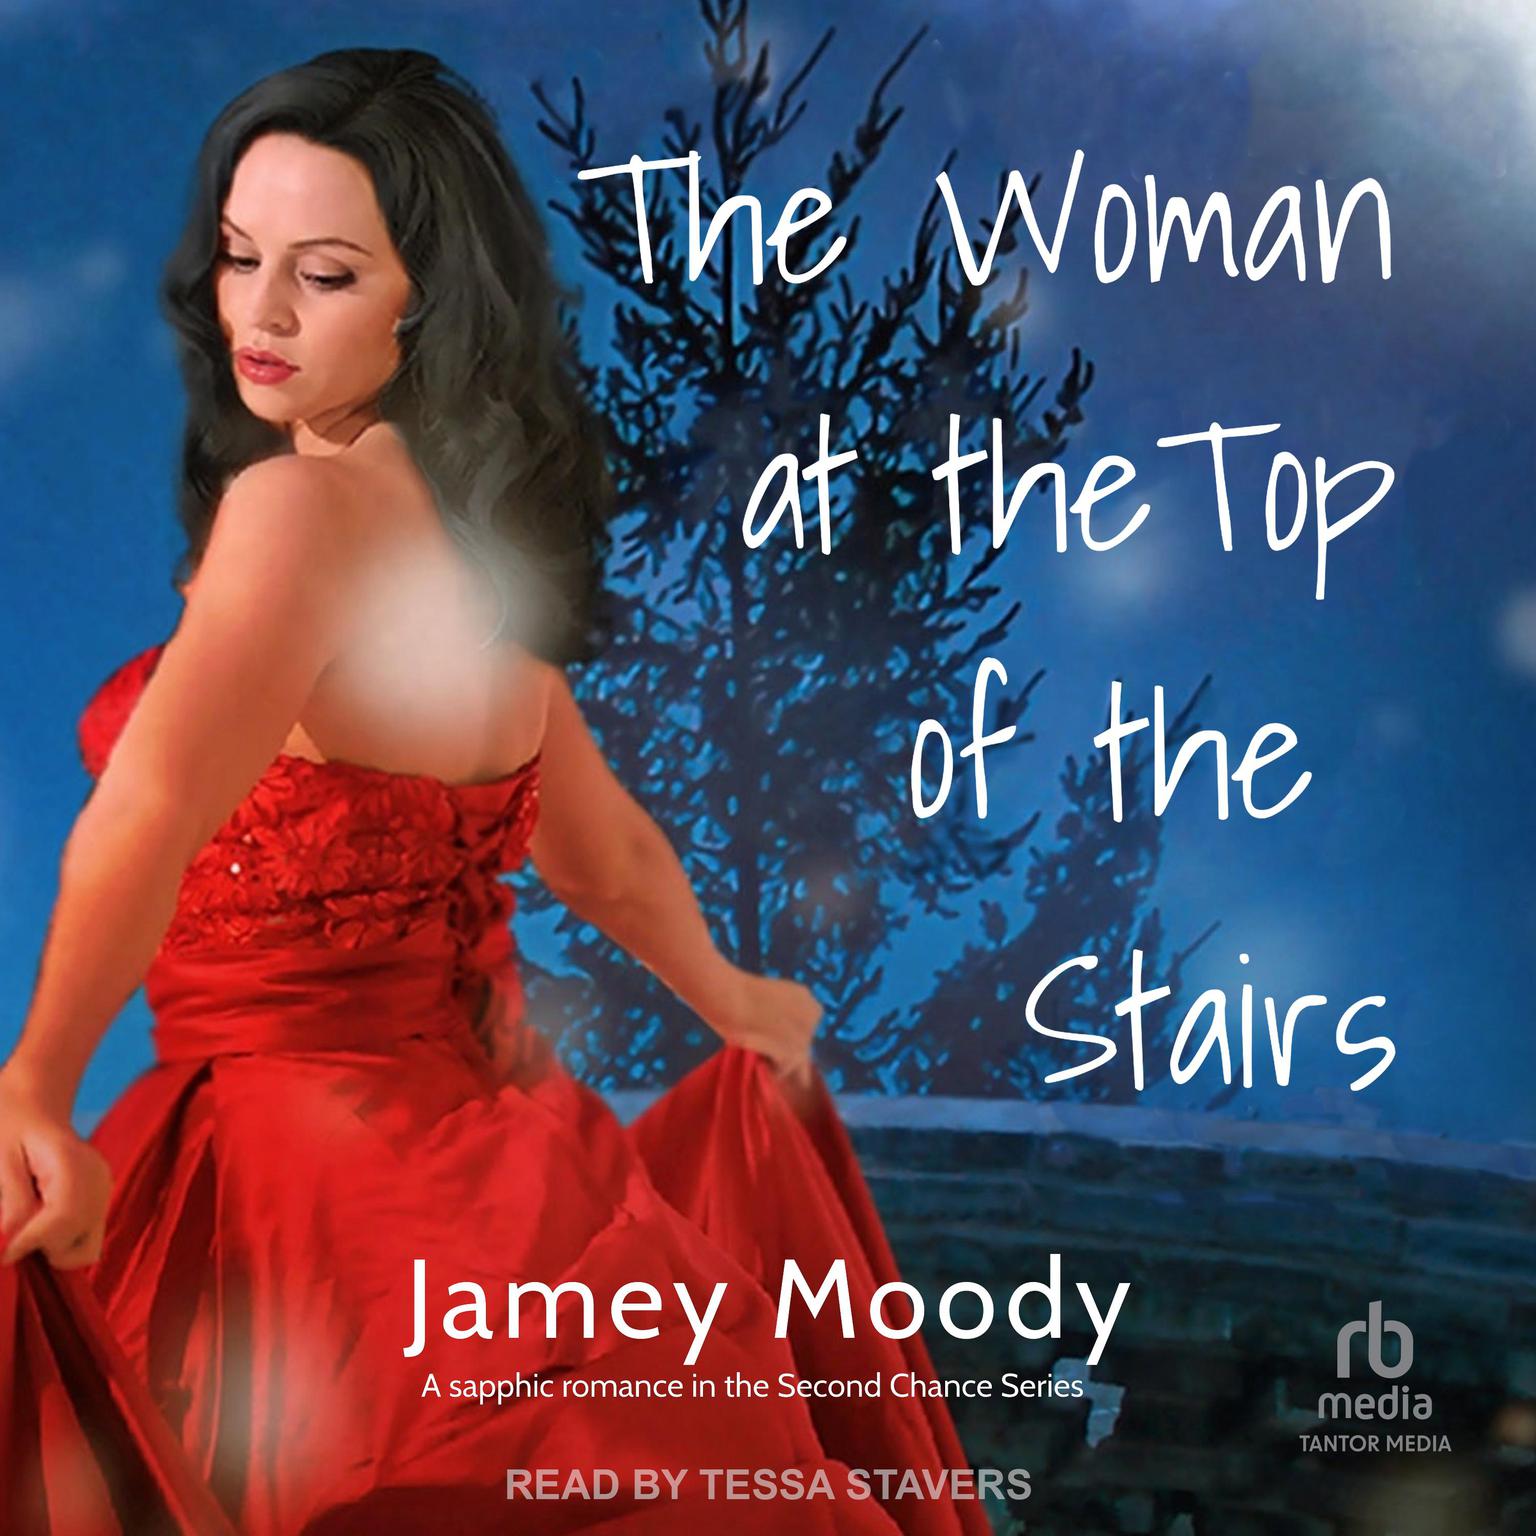 Jamey Moody, Tessa Stavers: The Woman at the Top of the Stairs (AudiobookFormat, 2023, Tantor Audio)